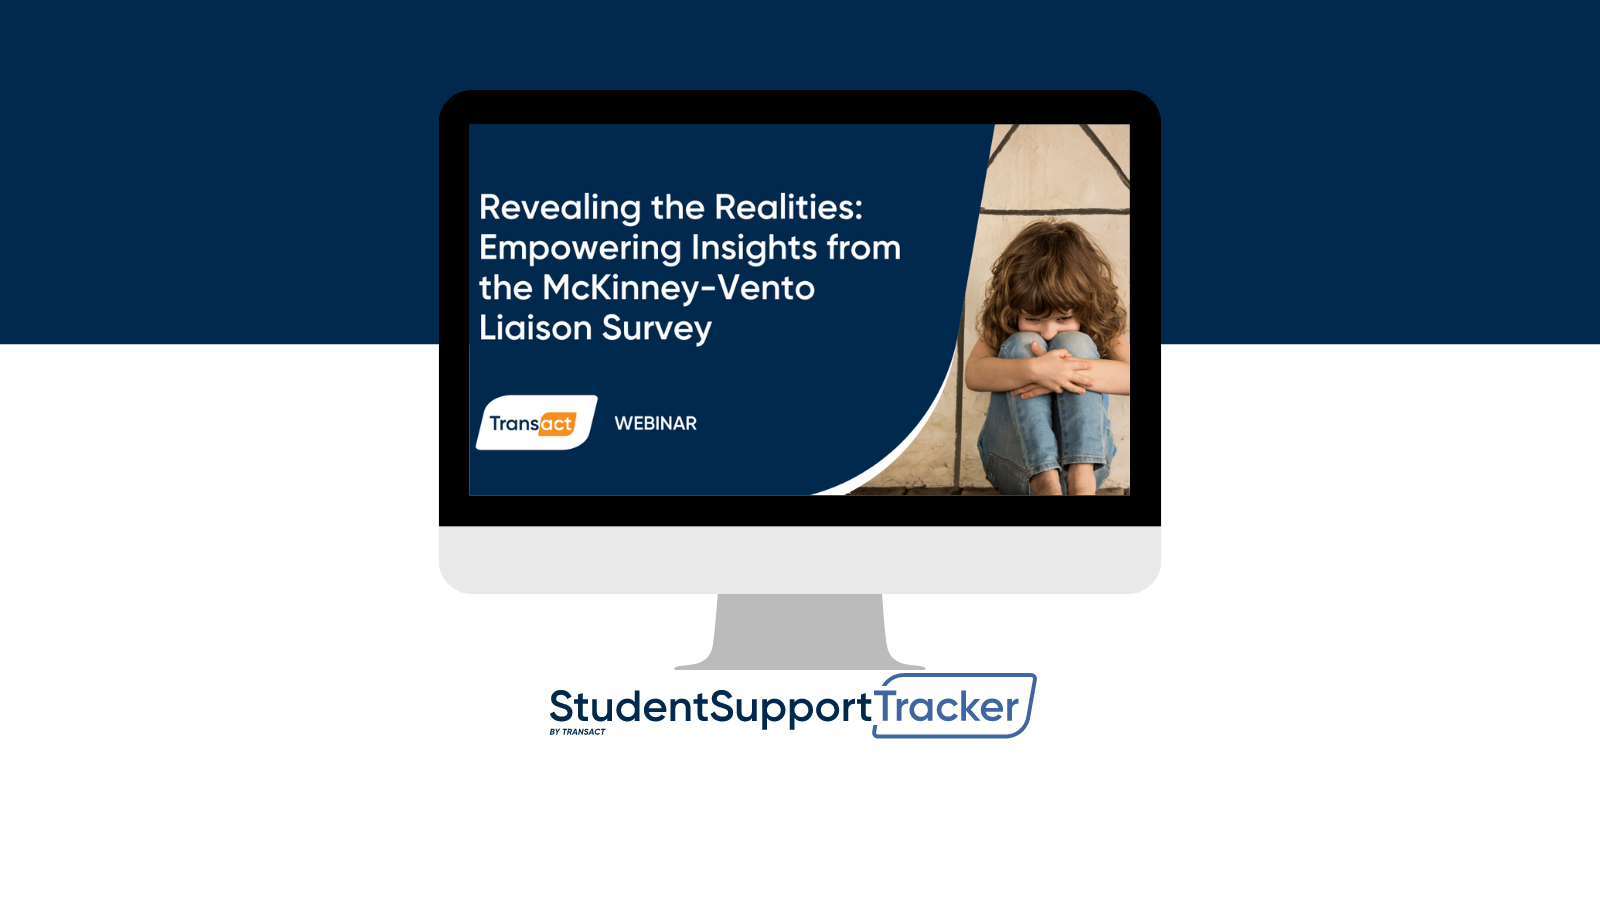 Revealing the Realities: Empowering Insights from the McKinney-Vento Liaison Survey